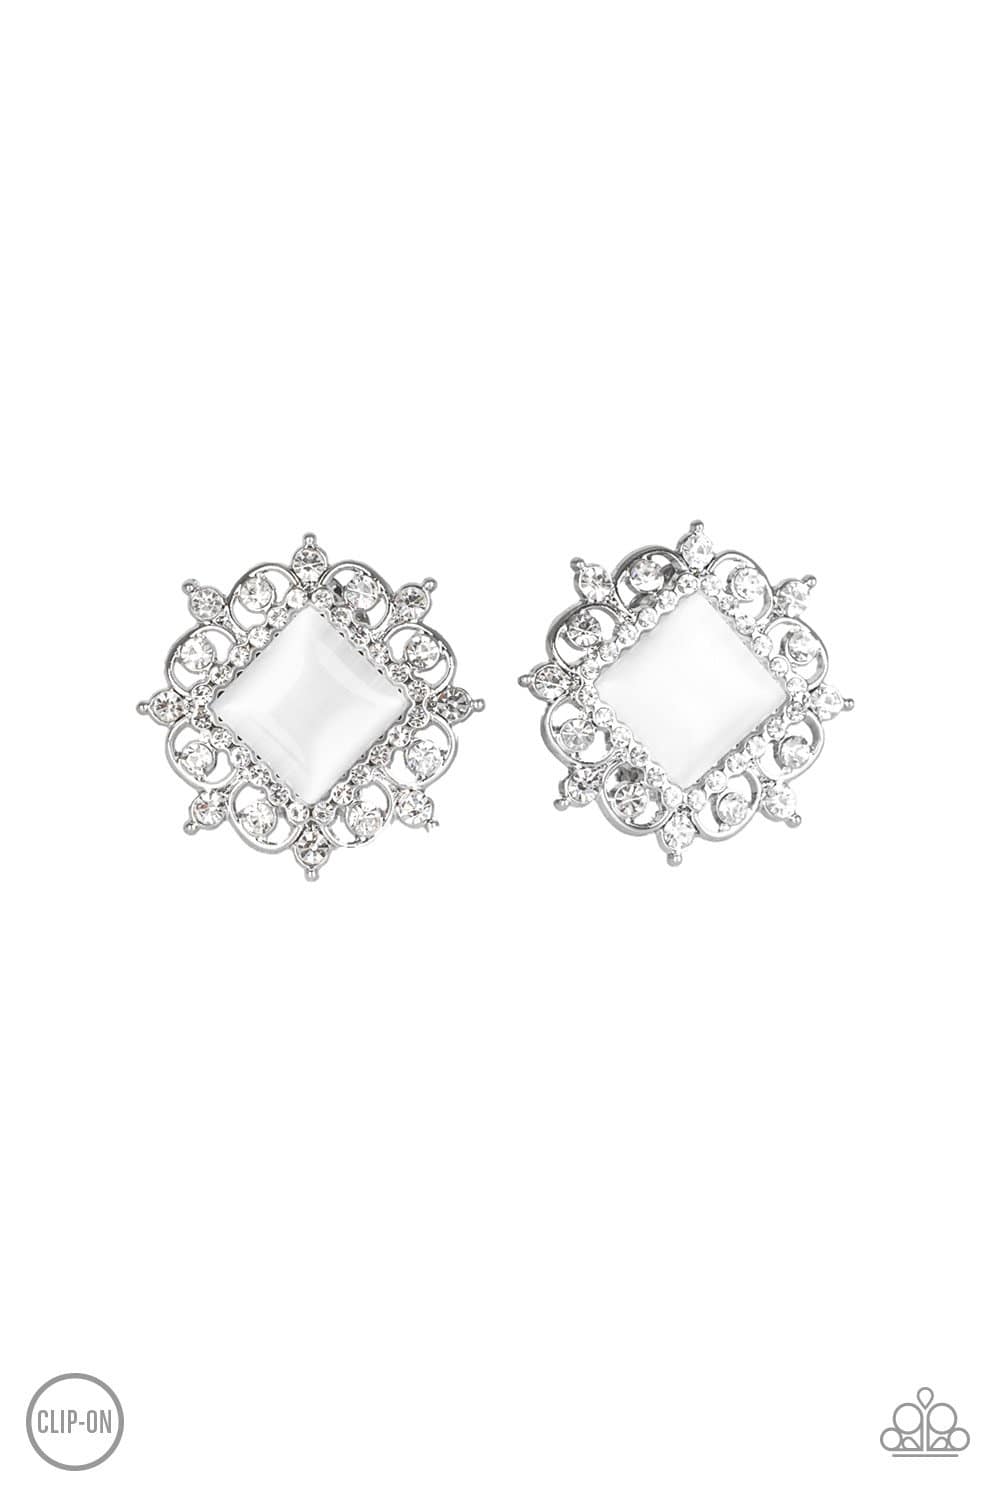 Get Rich Quick White Clip-on Earrings - Paparazzi Accessories - GlaMarous Titi Jewels